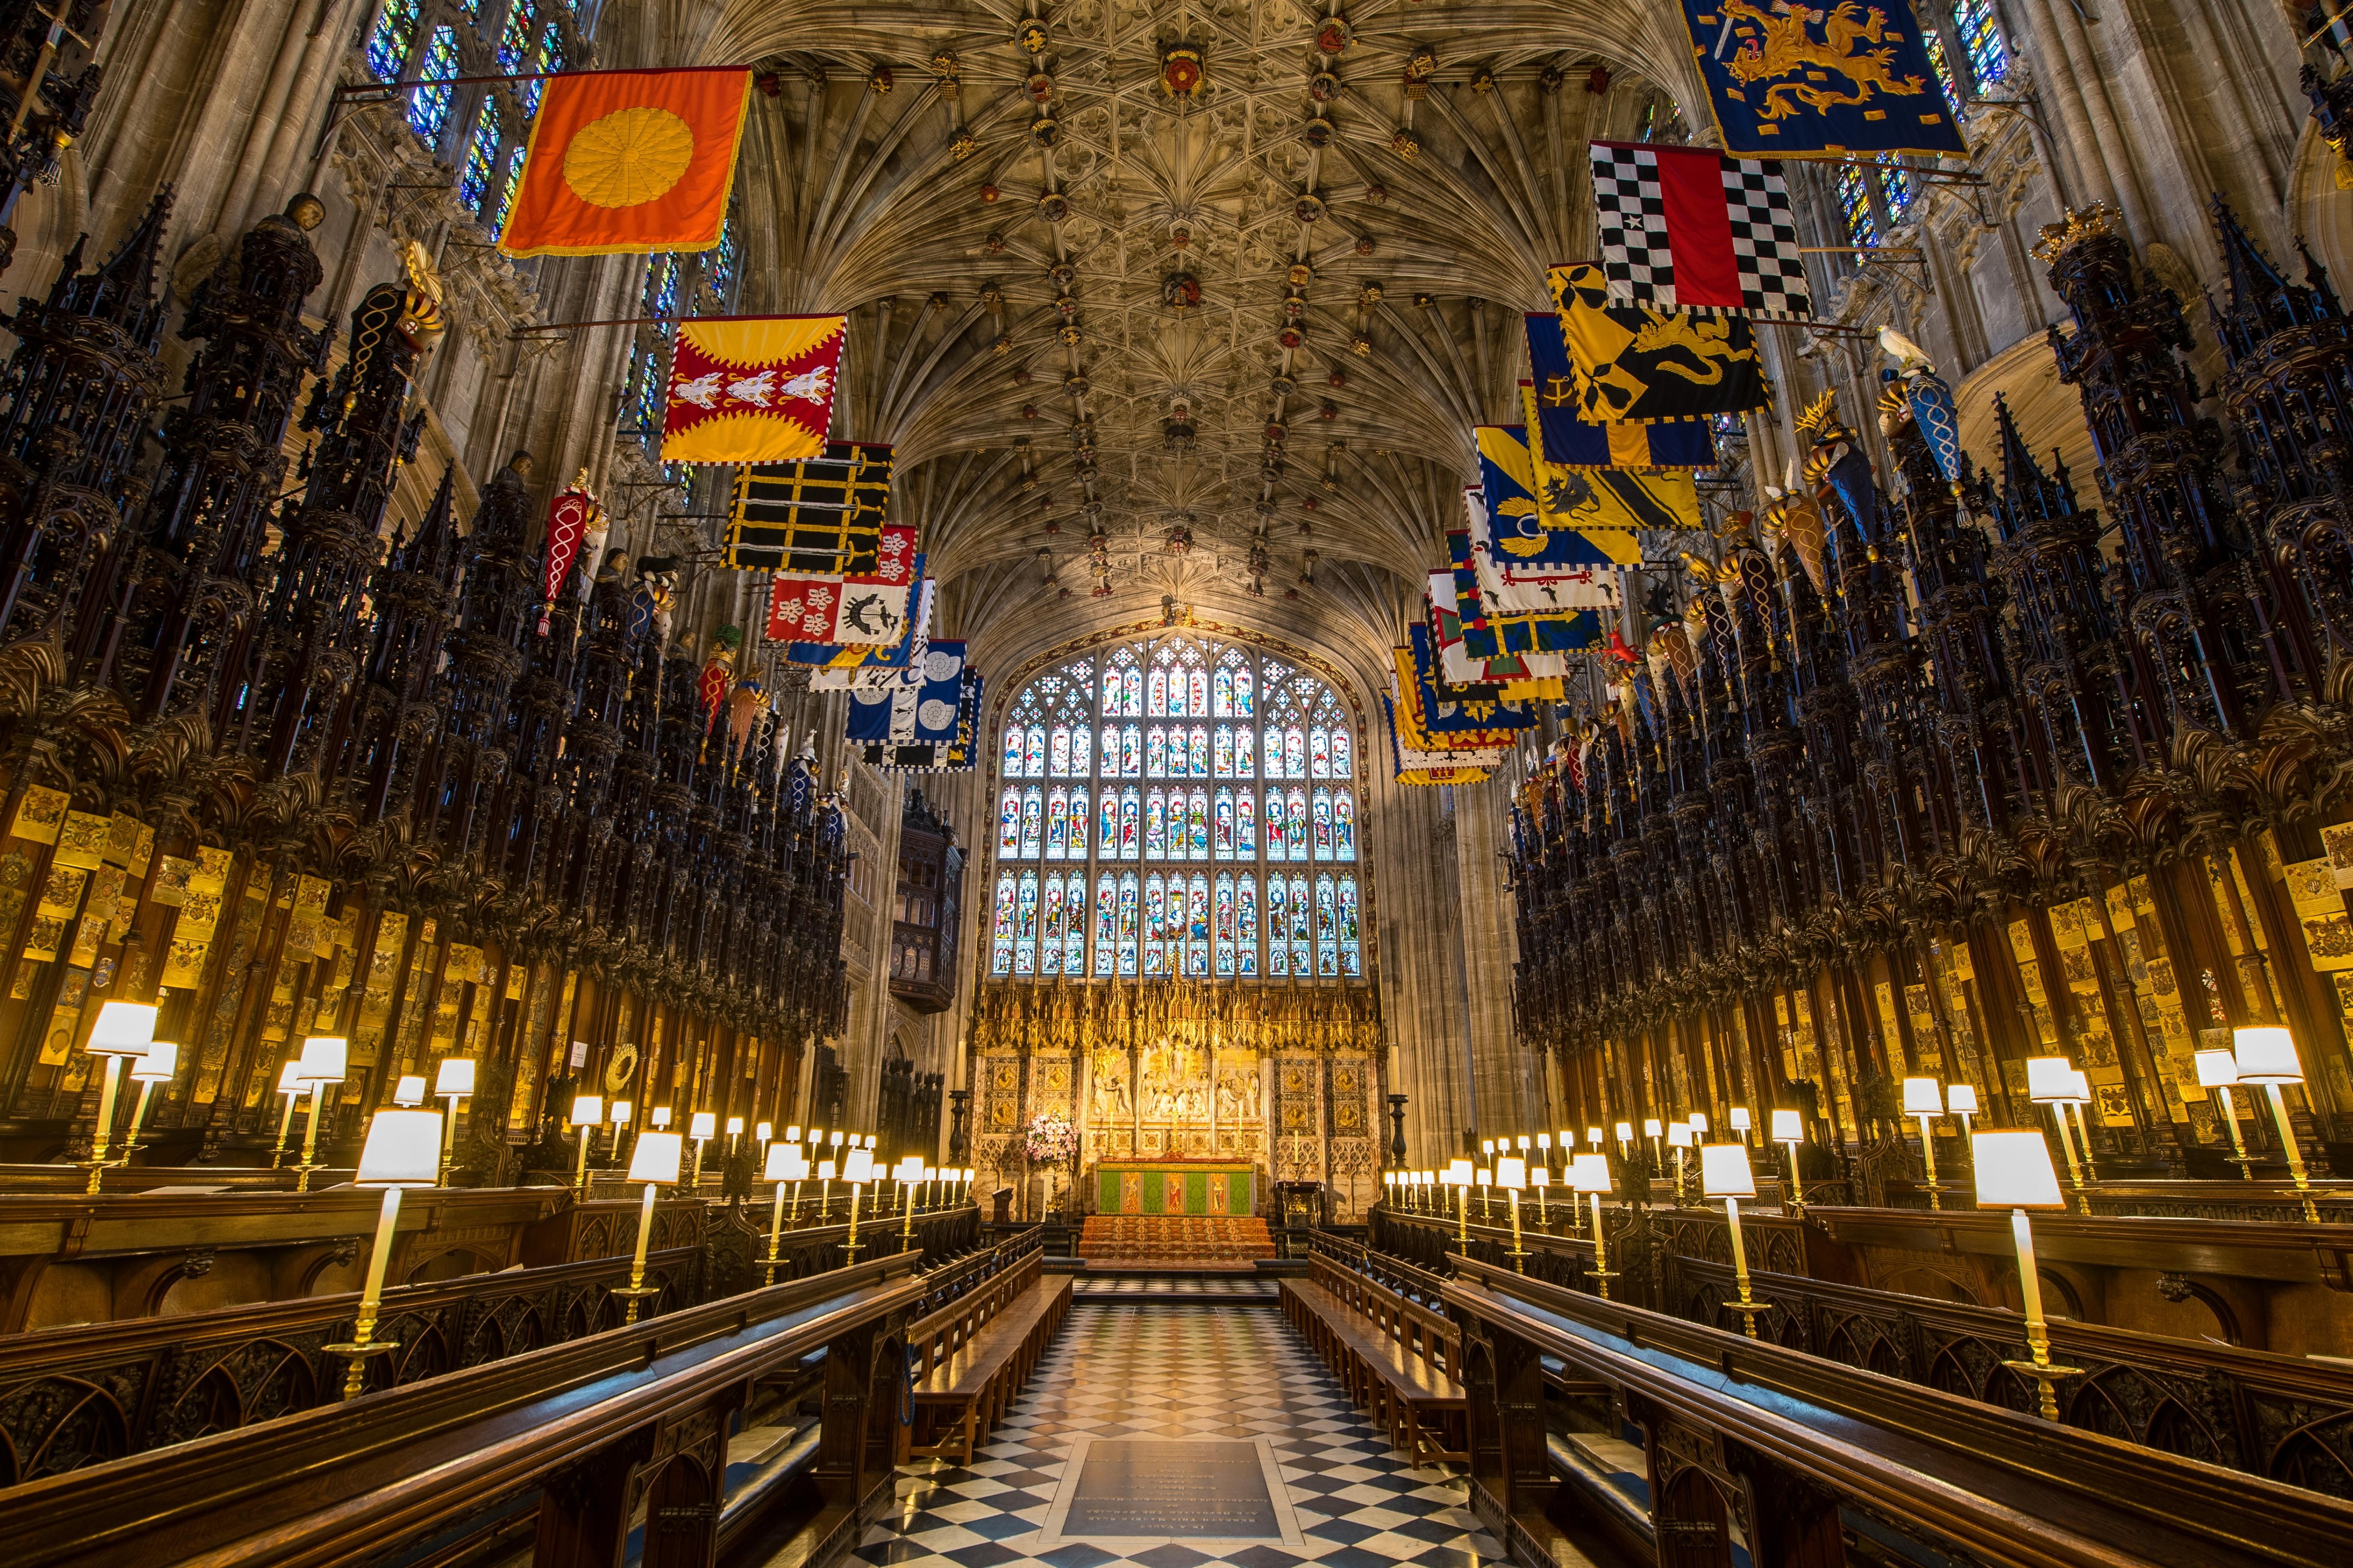 A general view shows the choir in St George's Chapel at Windsor Castle, west of London, on February 11, 2018. Dominic Lipinski—AFP/Getty Images (Dominic Lipinski—AFP/Getty Images)